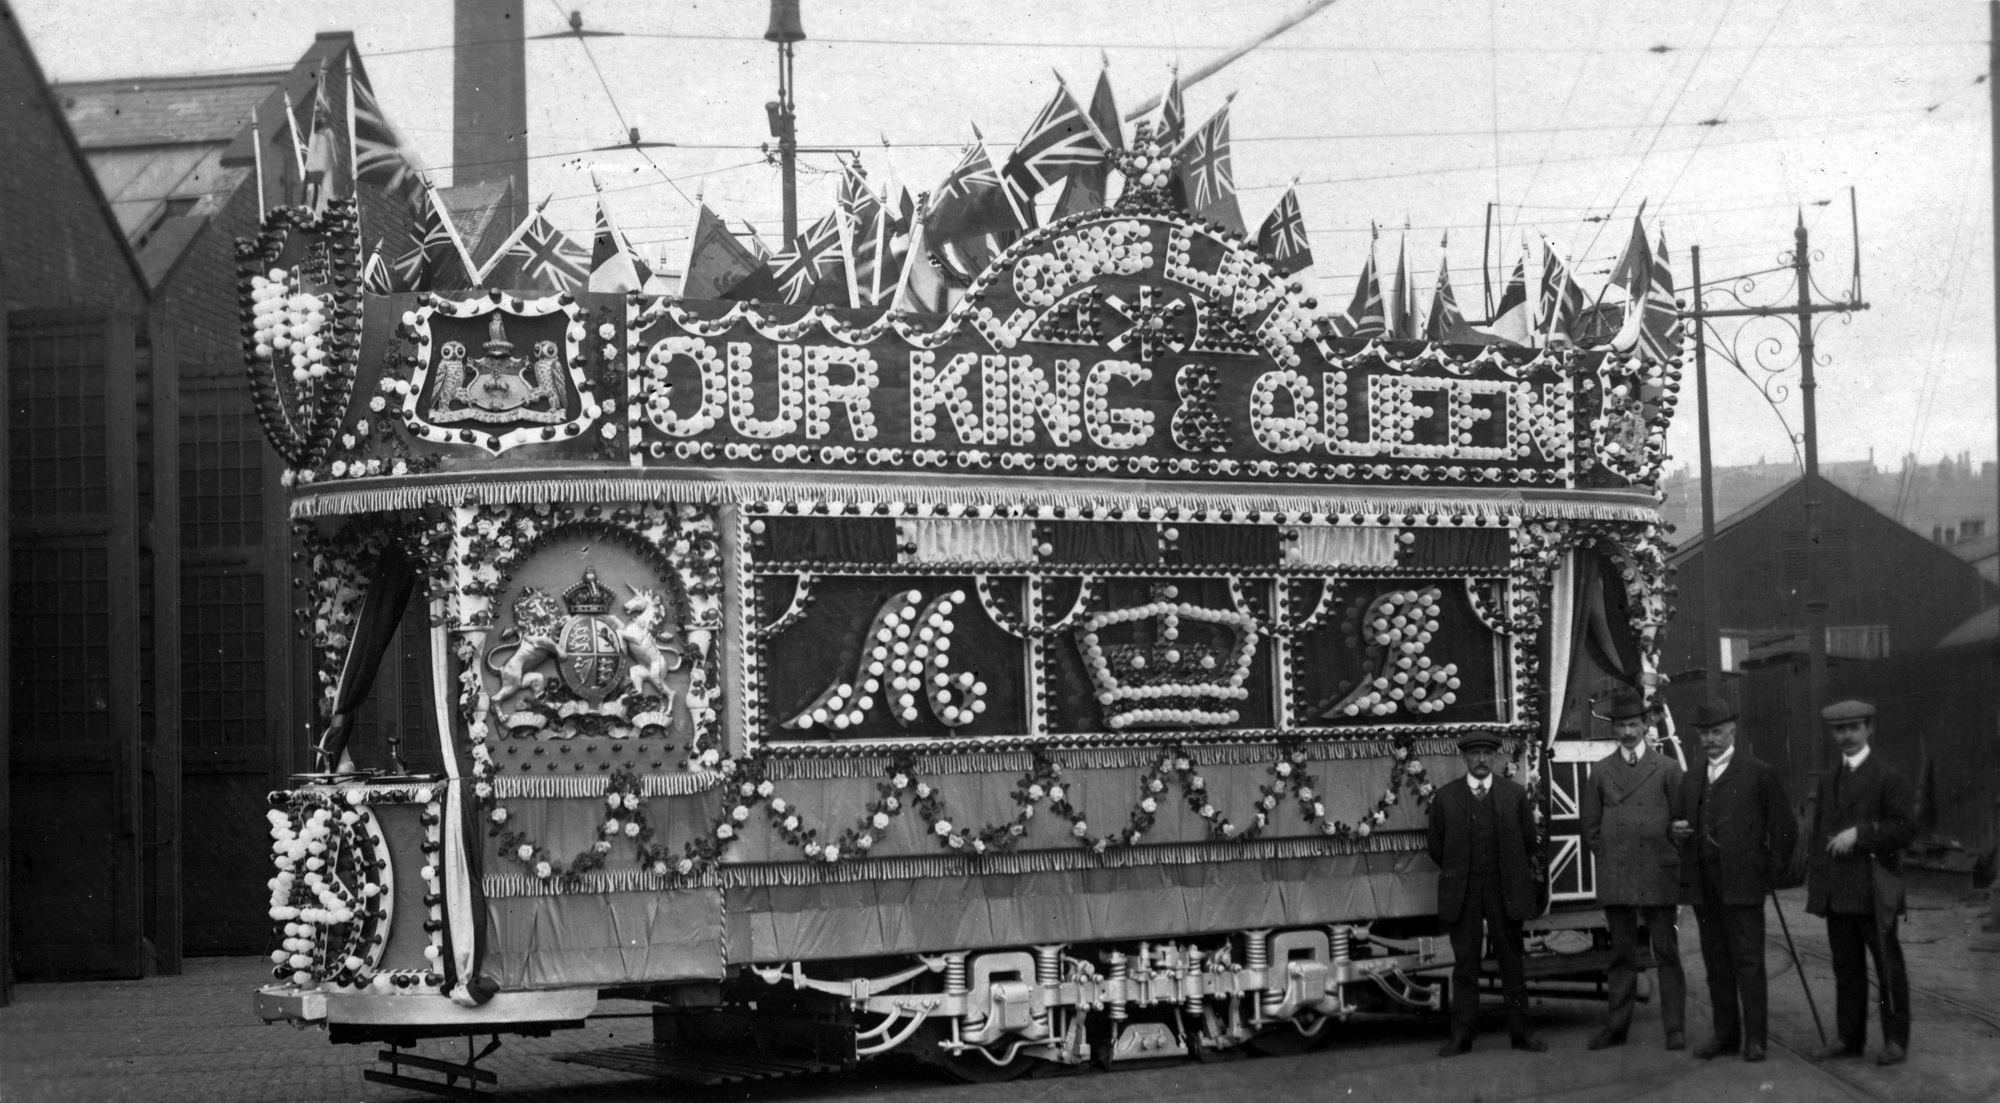 Image taken on June 2, 1911 - coronation of King George V - Credit Leeds Libraries and Information Service -2000